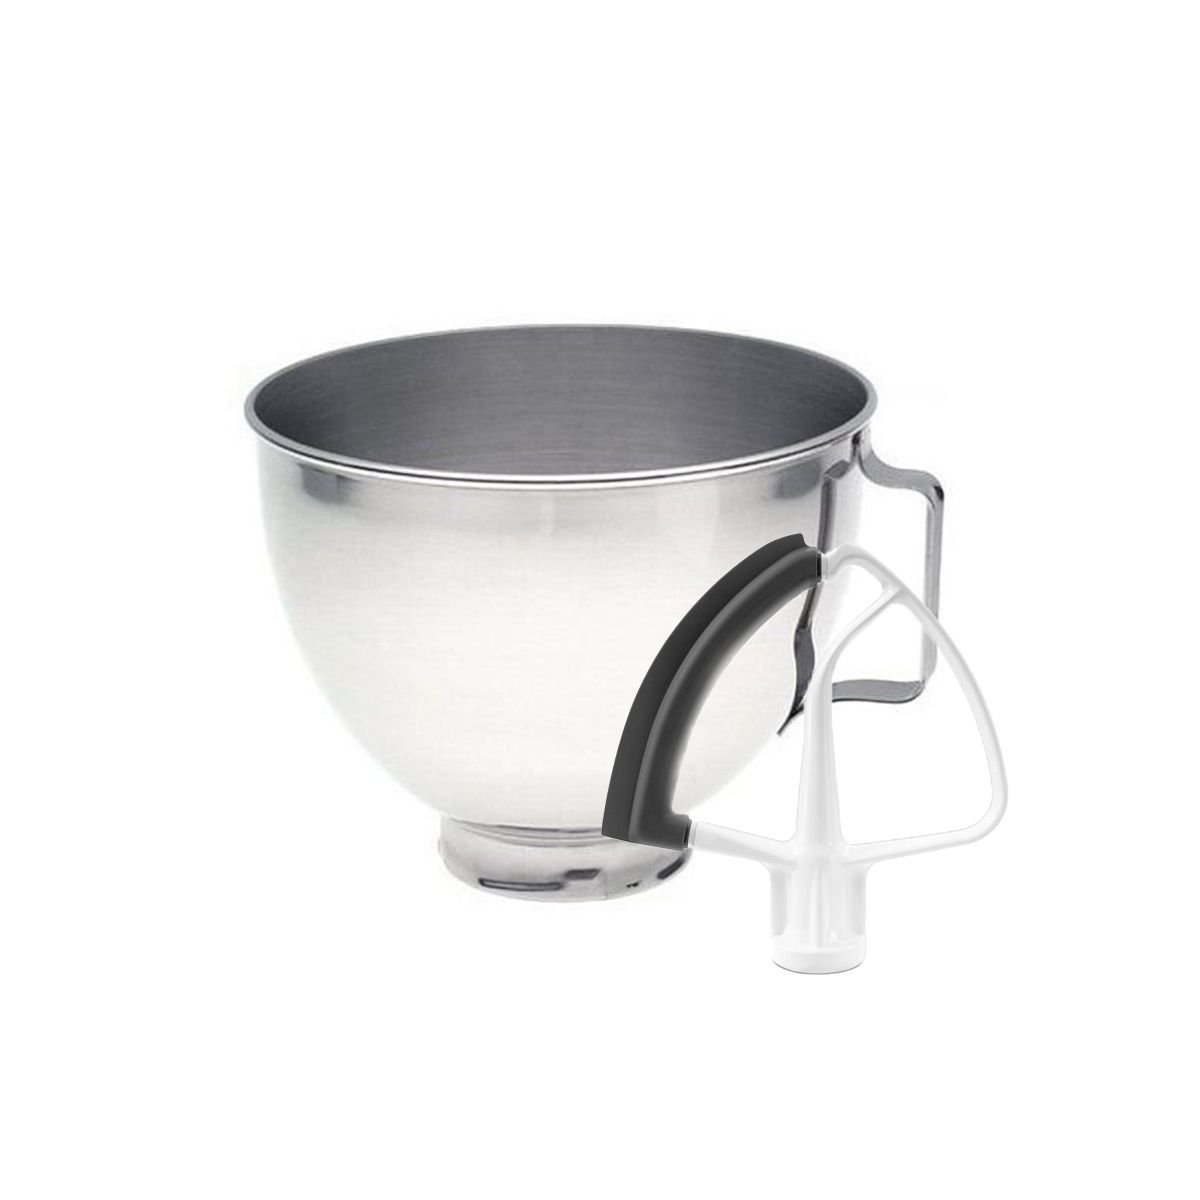  KitchenAid K5THSBP Tilt-Head Mixer Bowl with Handle, Polished Stainless  Steel, Polished Stainless Steel, 5-Quart: Mixer Accessories: Home & Kitchen